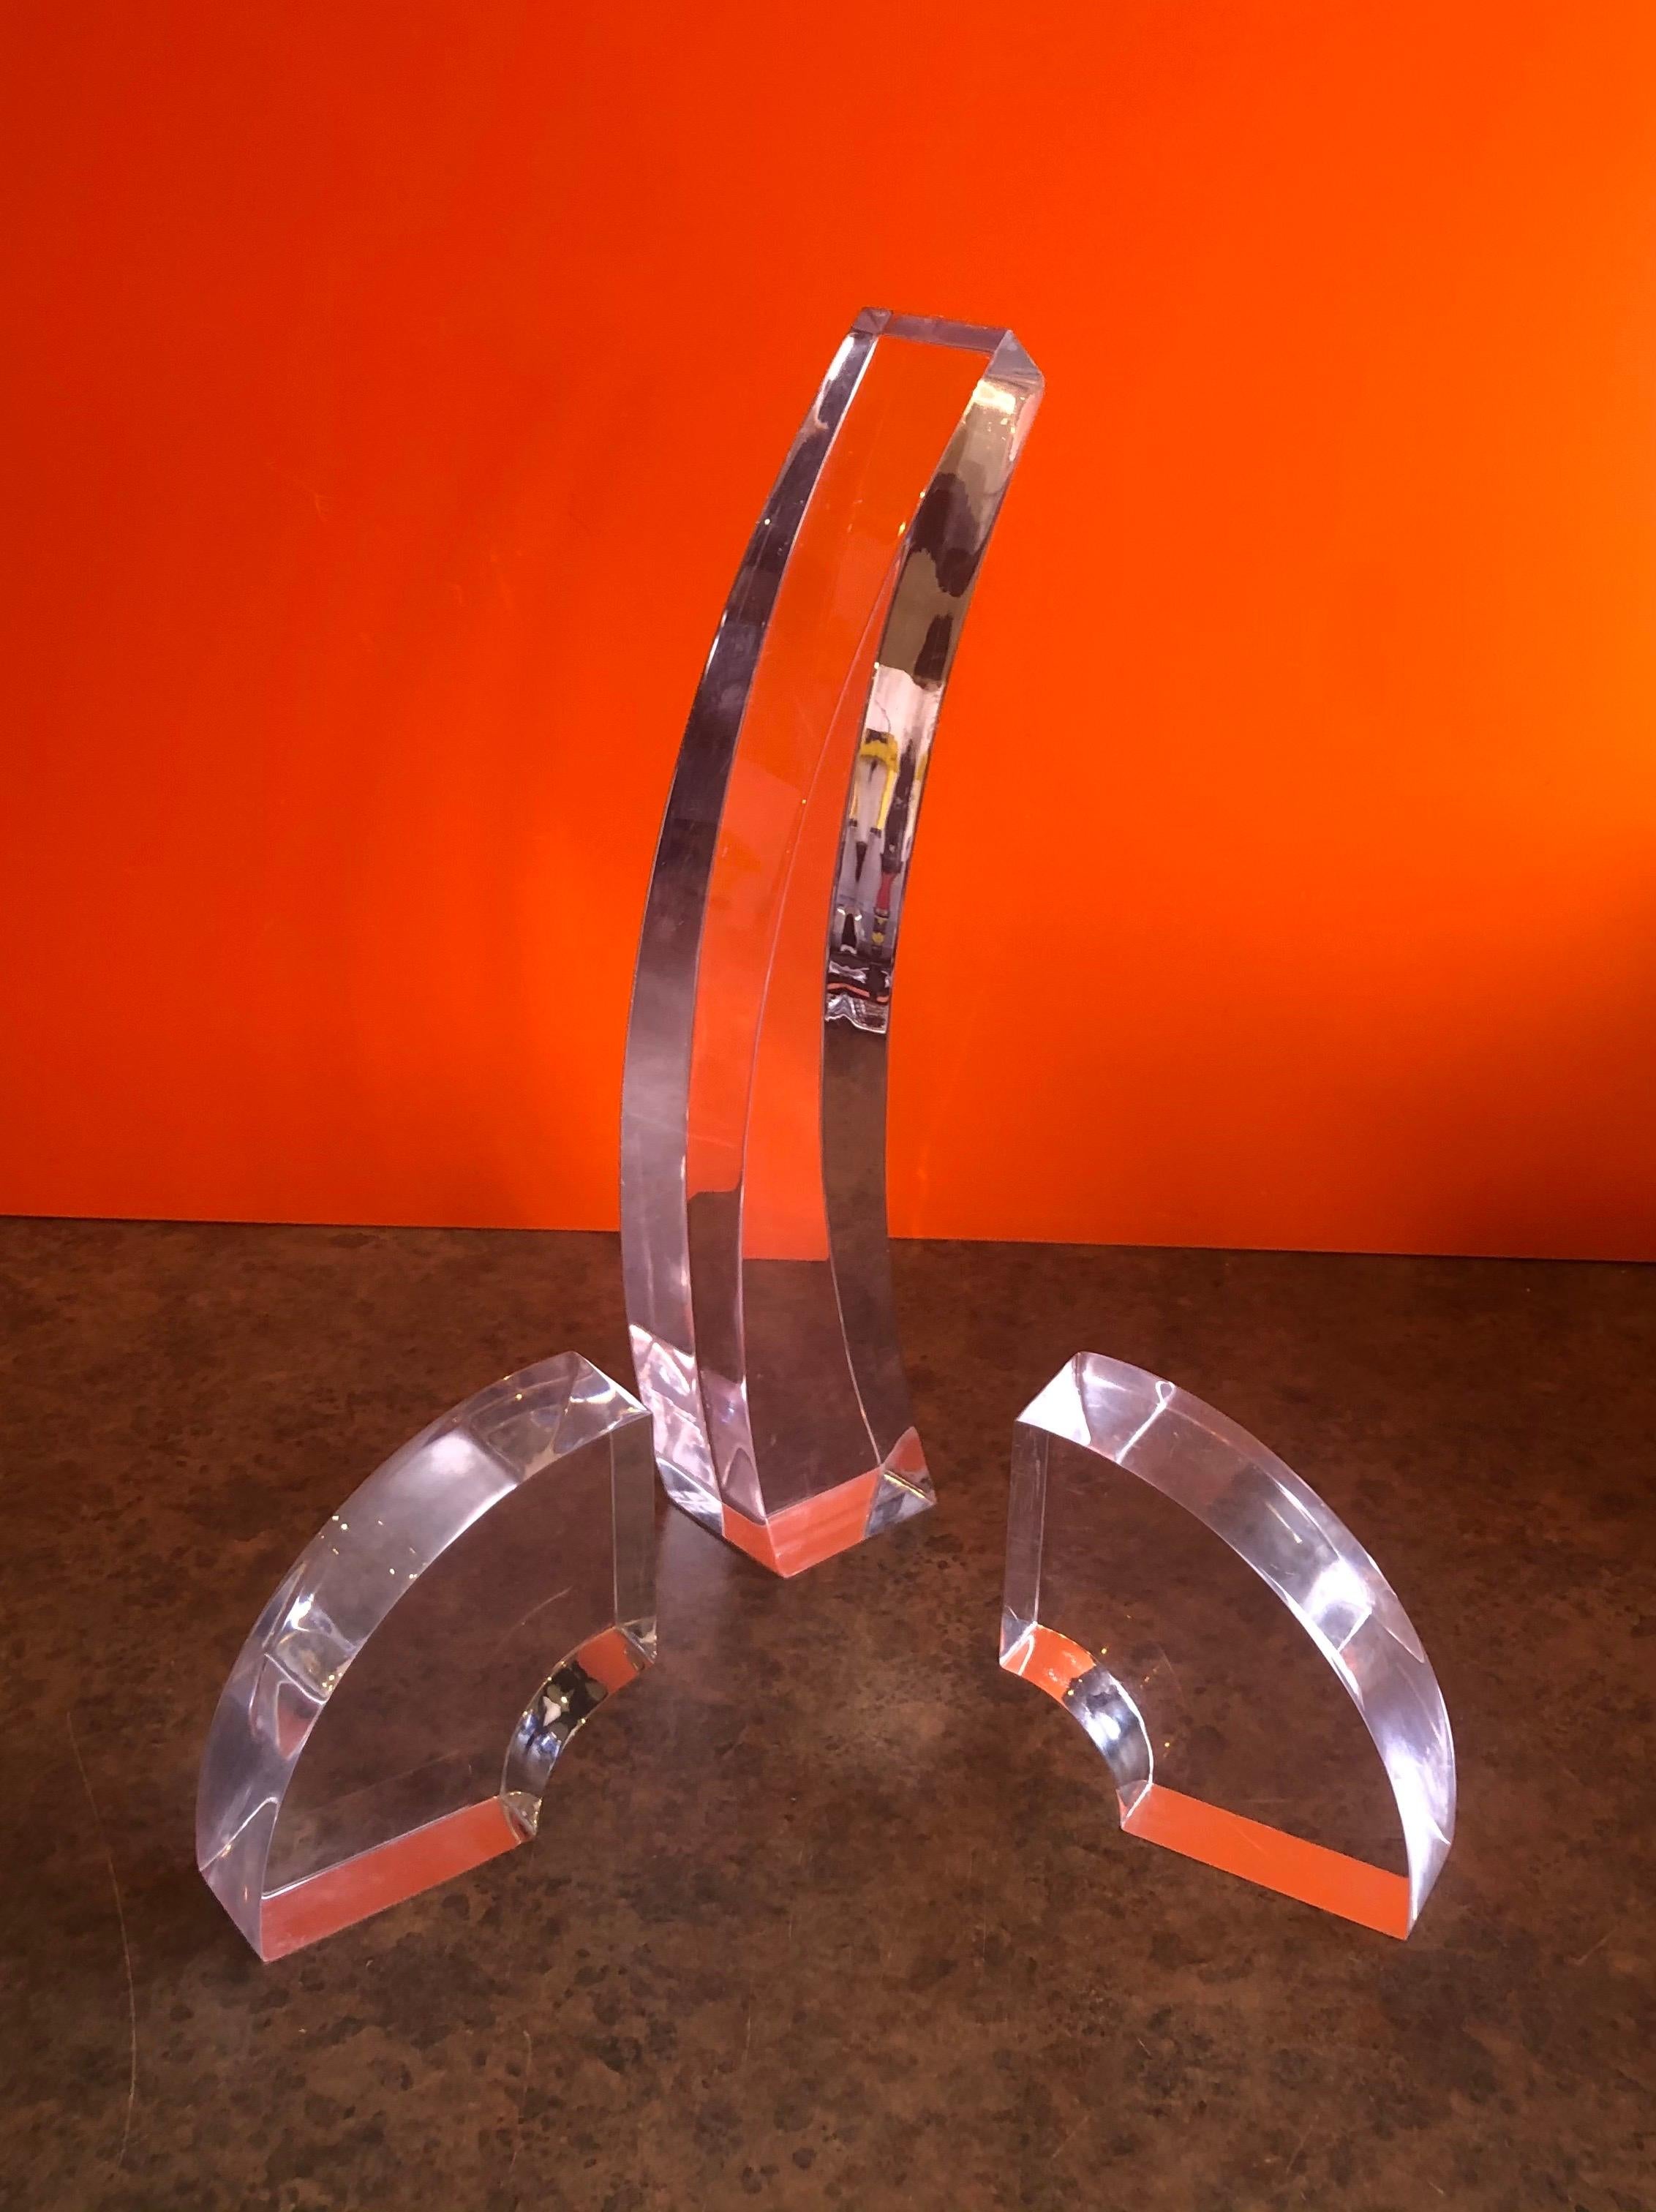 Large midcentury stylized Lucite three-piece phallic sculpture, circa 1970s. The sculpture is made of three pieces of Lucite and can be configured in a number of different ways. The sculpture is unsigned and in very good vintage condition. Measures: